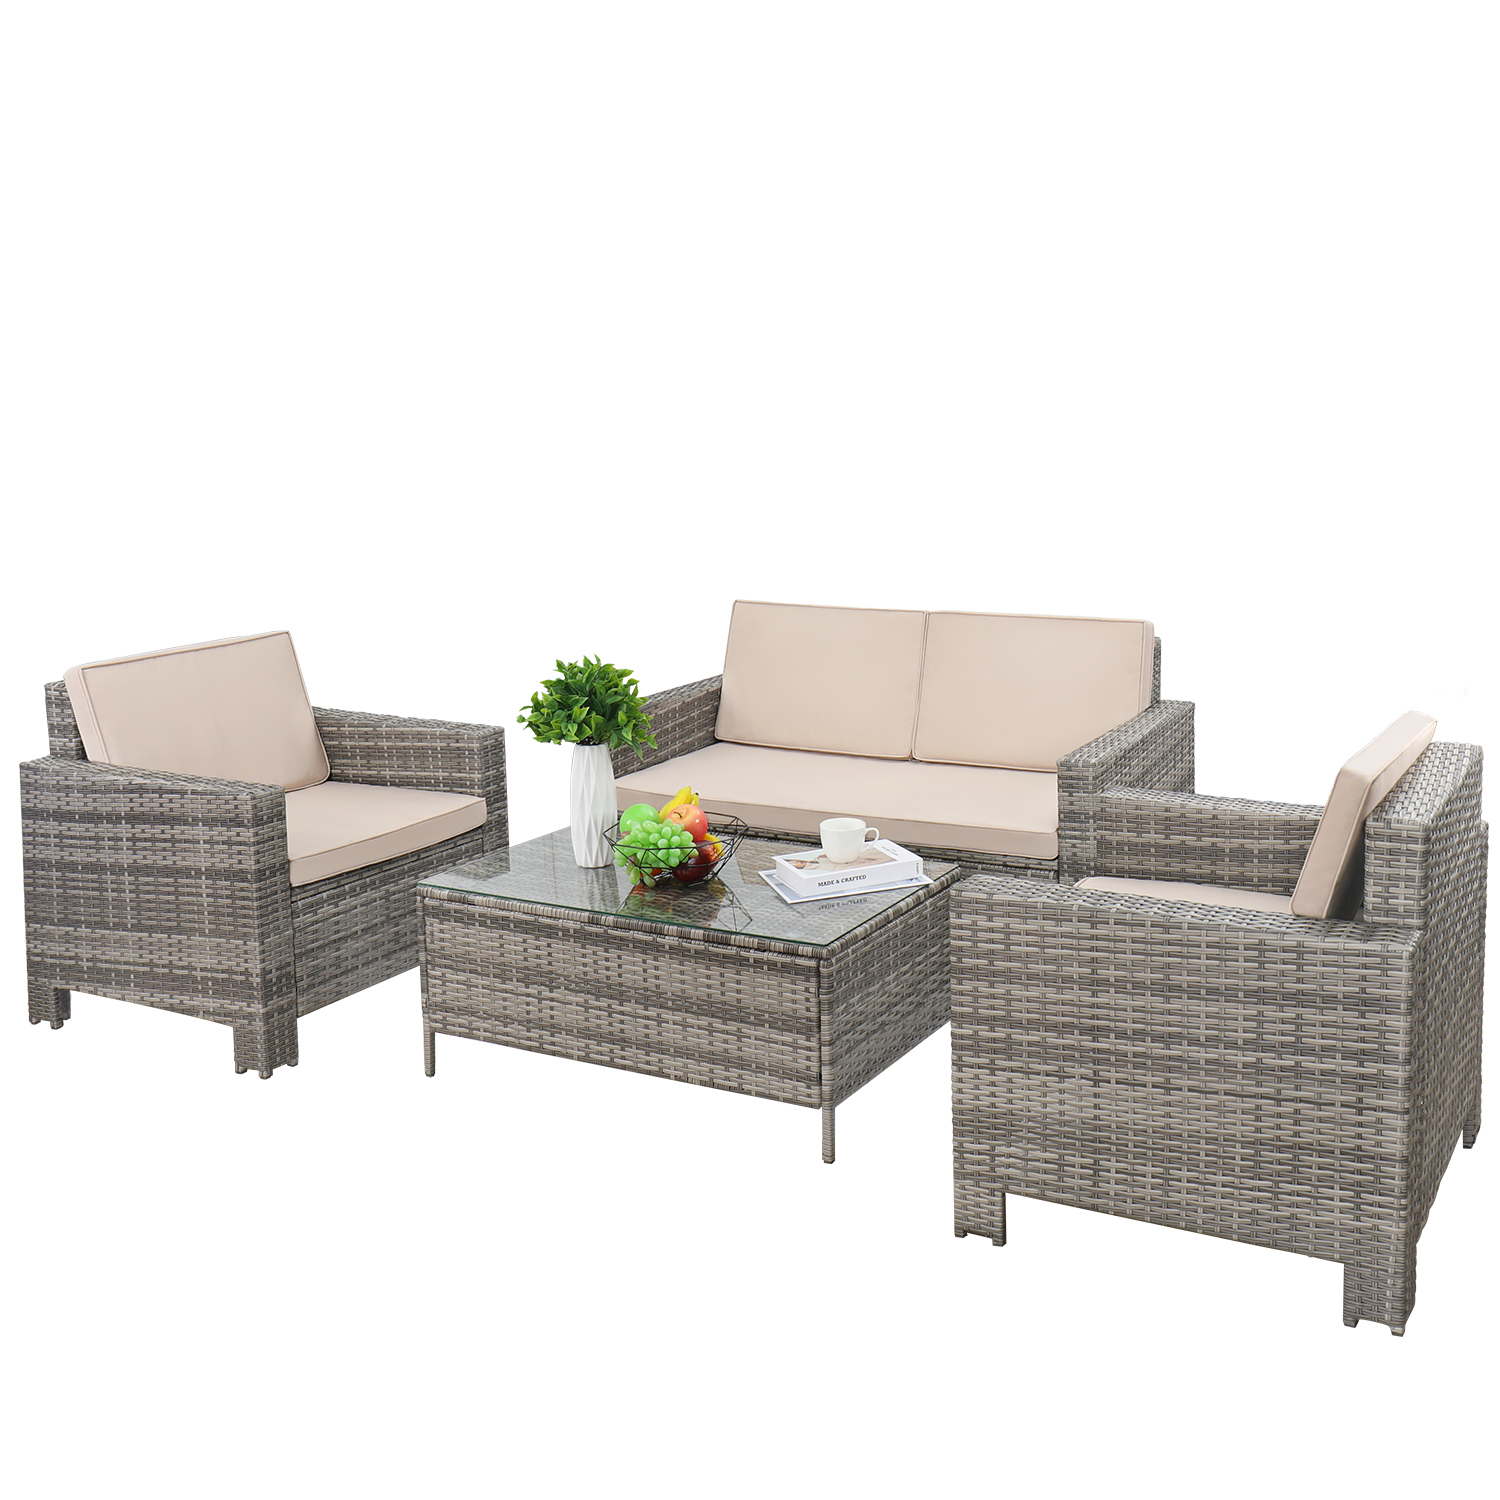 LACOO 4-Piece Grey Wicker Outdoor Patio Conversation Set with Beige Cushions - image 2 of 4